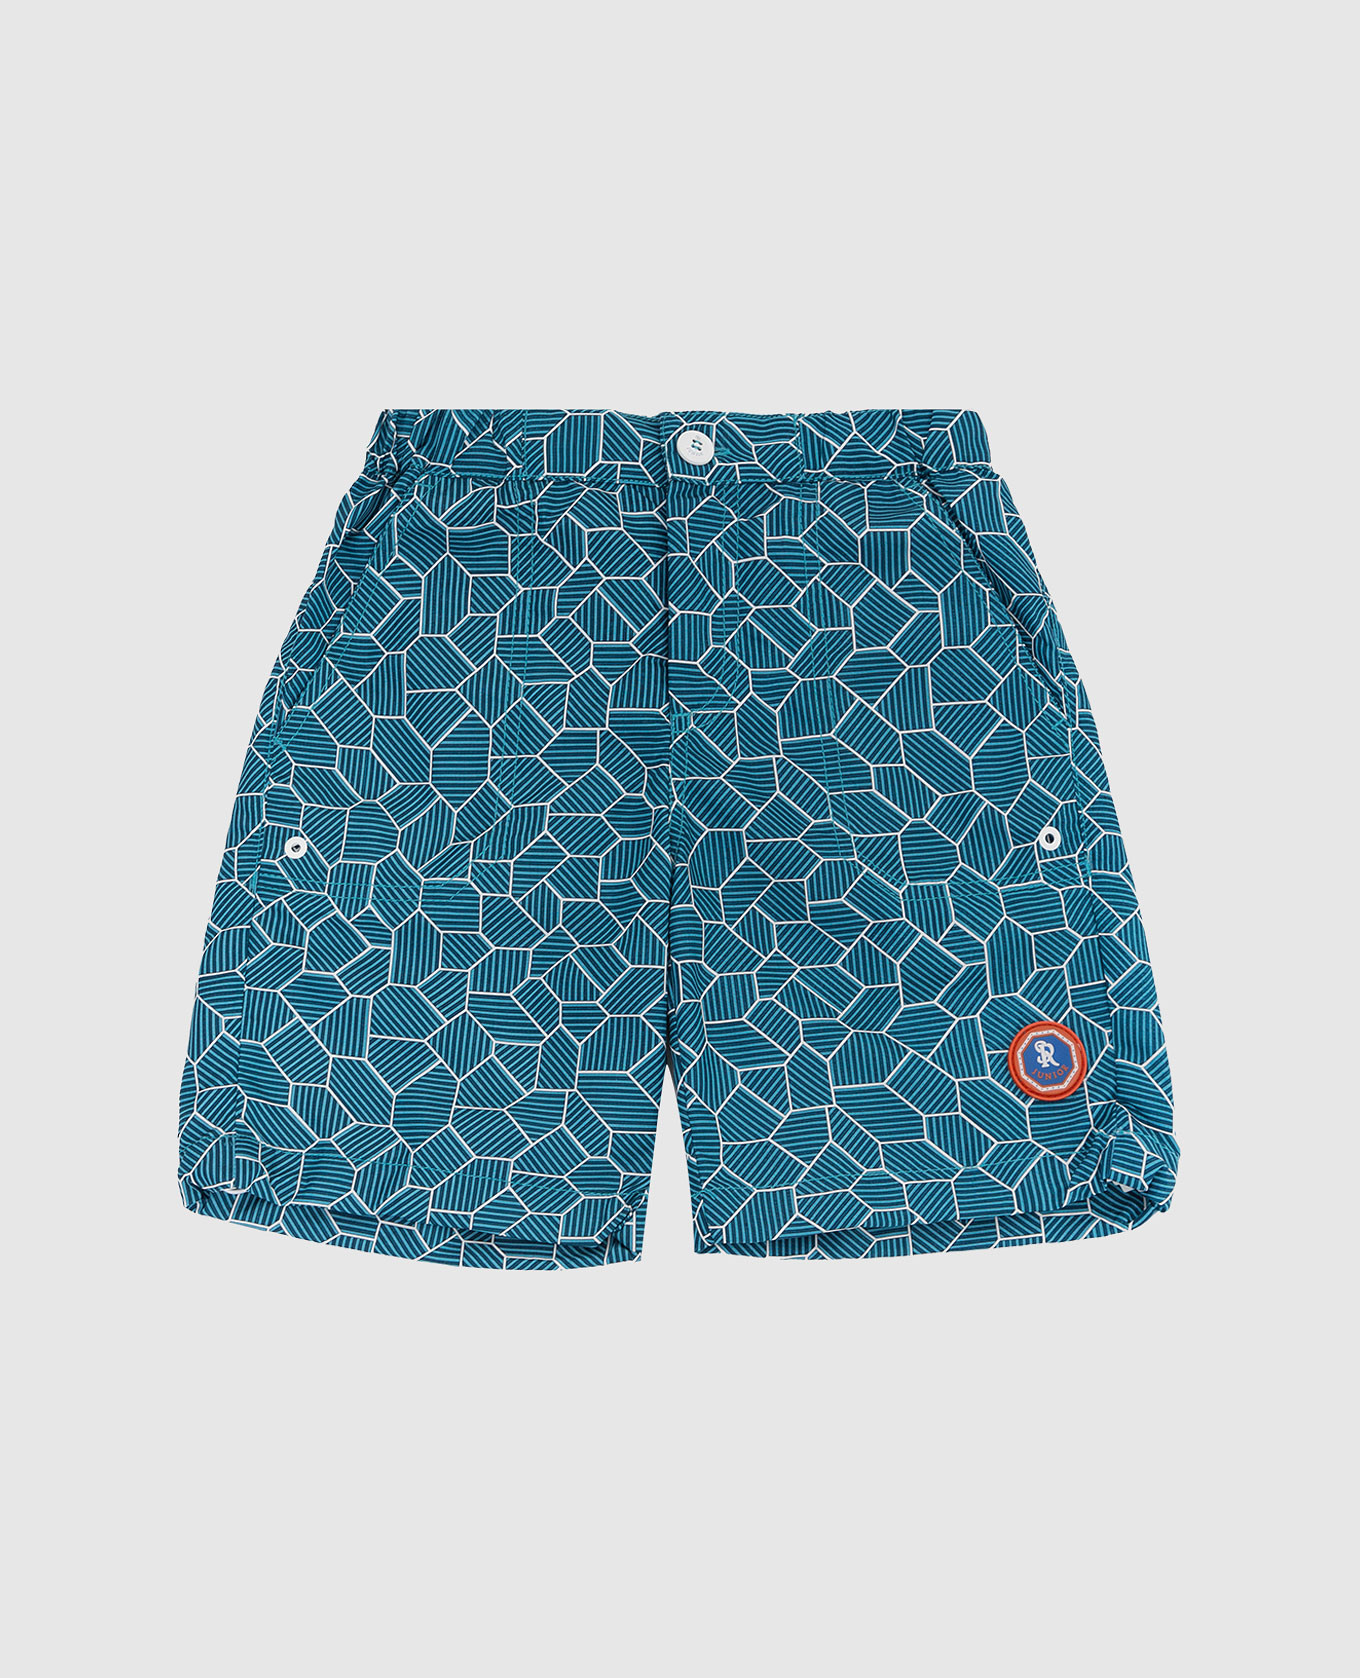 Children's turquoise patterned swimming shorts